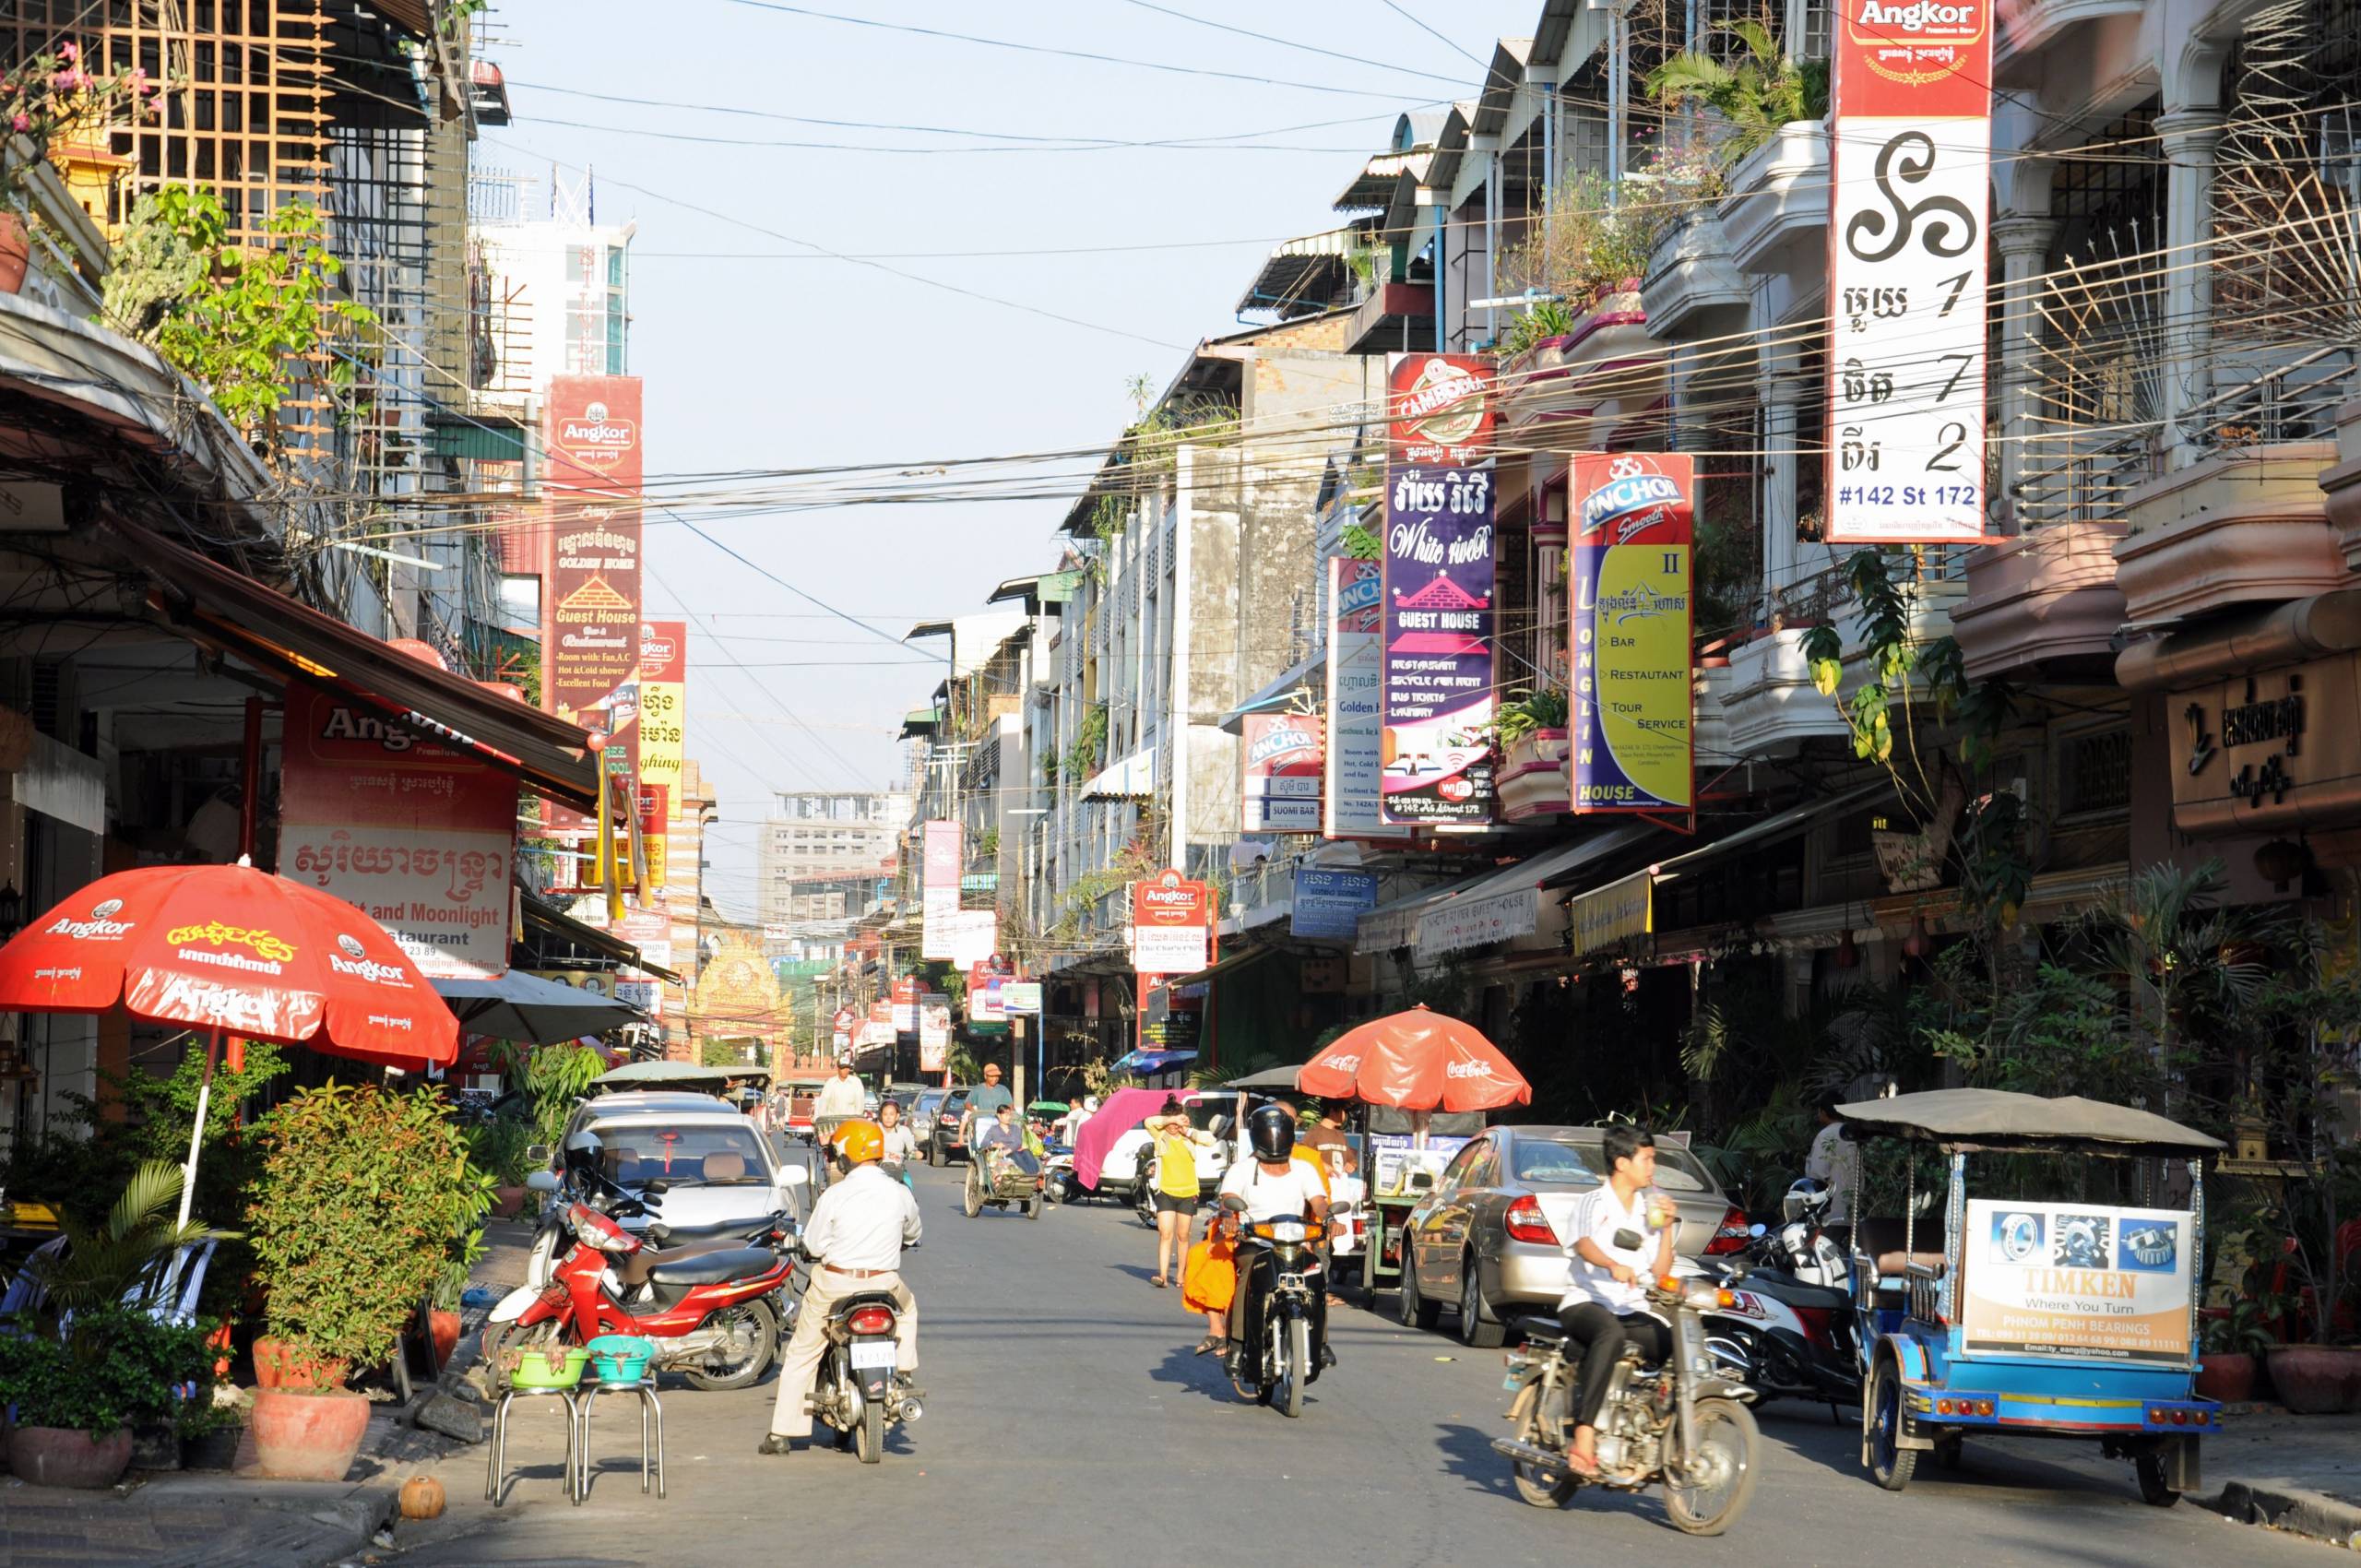 A photo of a street in Phnom Penh, Cambodia in January